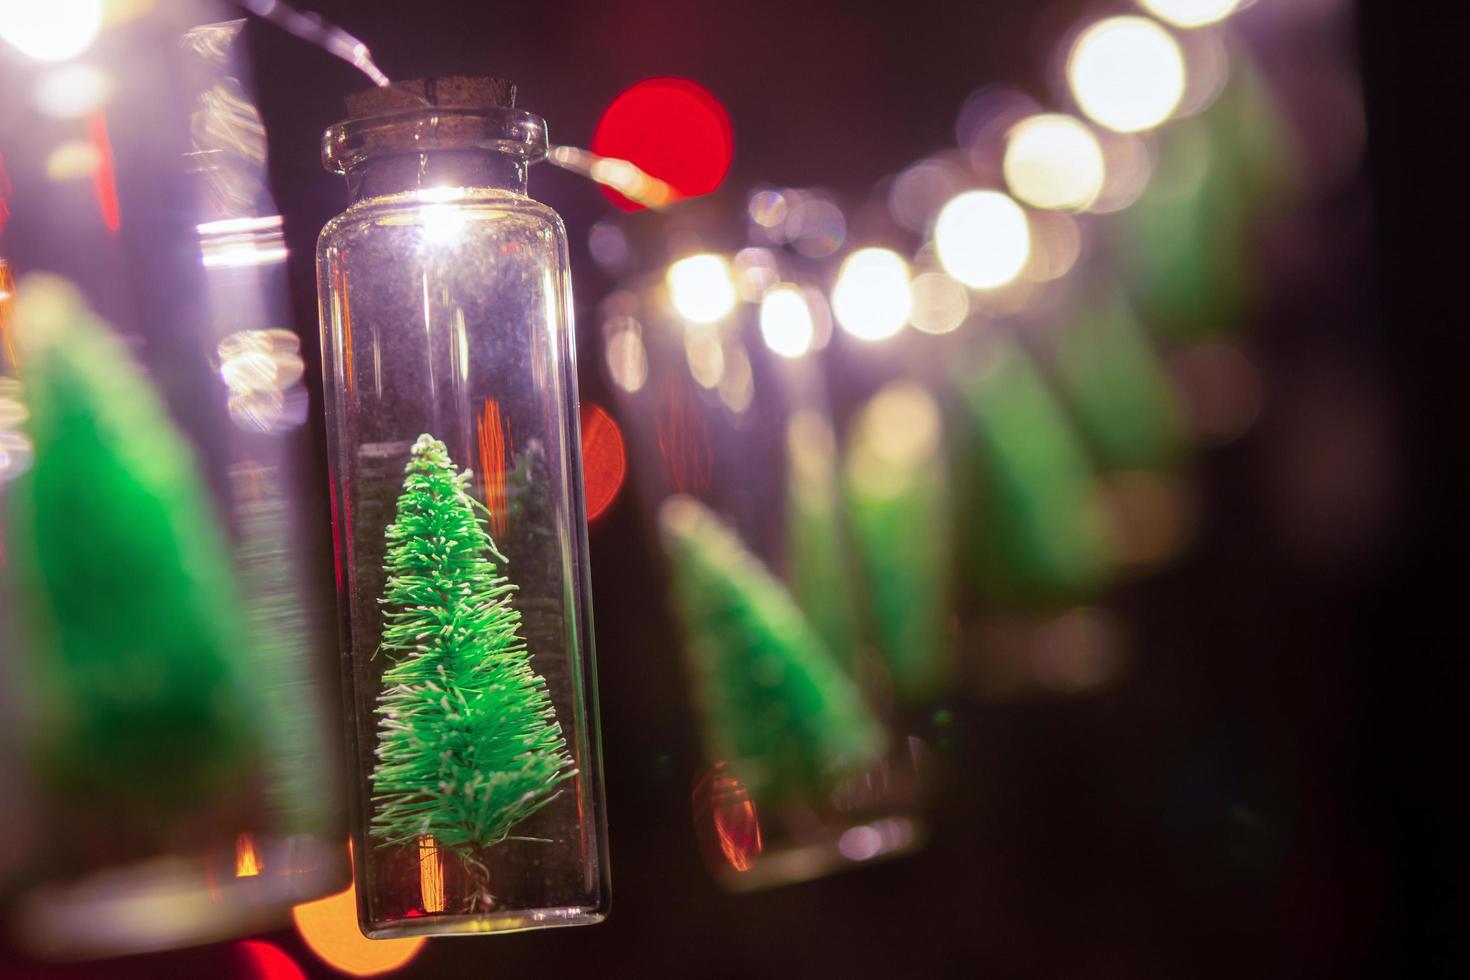 Merry Christmas and happy new year. Hanging small Christmas tree in glass jar on pine branches Christmas tree garland and ornaments over abstract bokeh photo